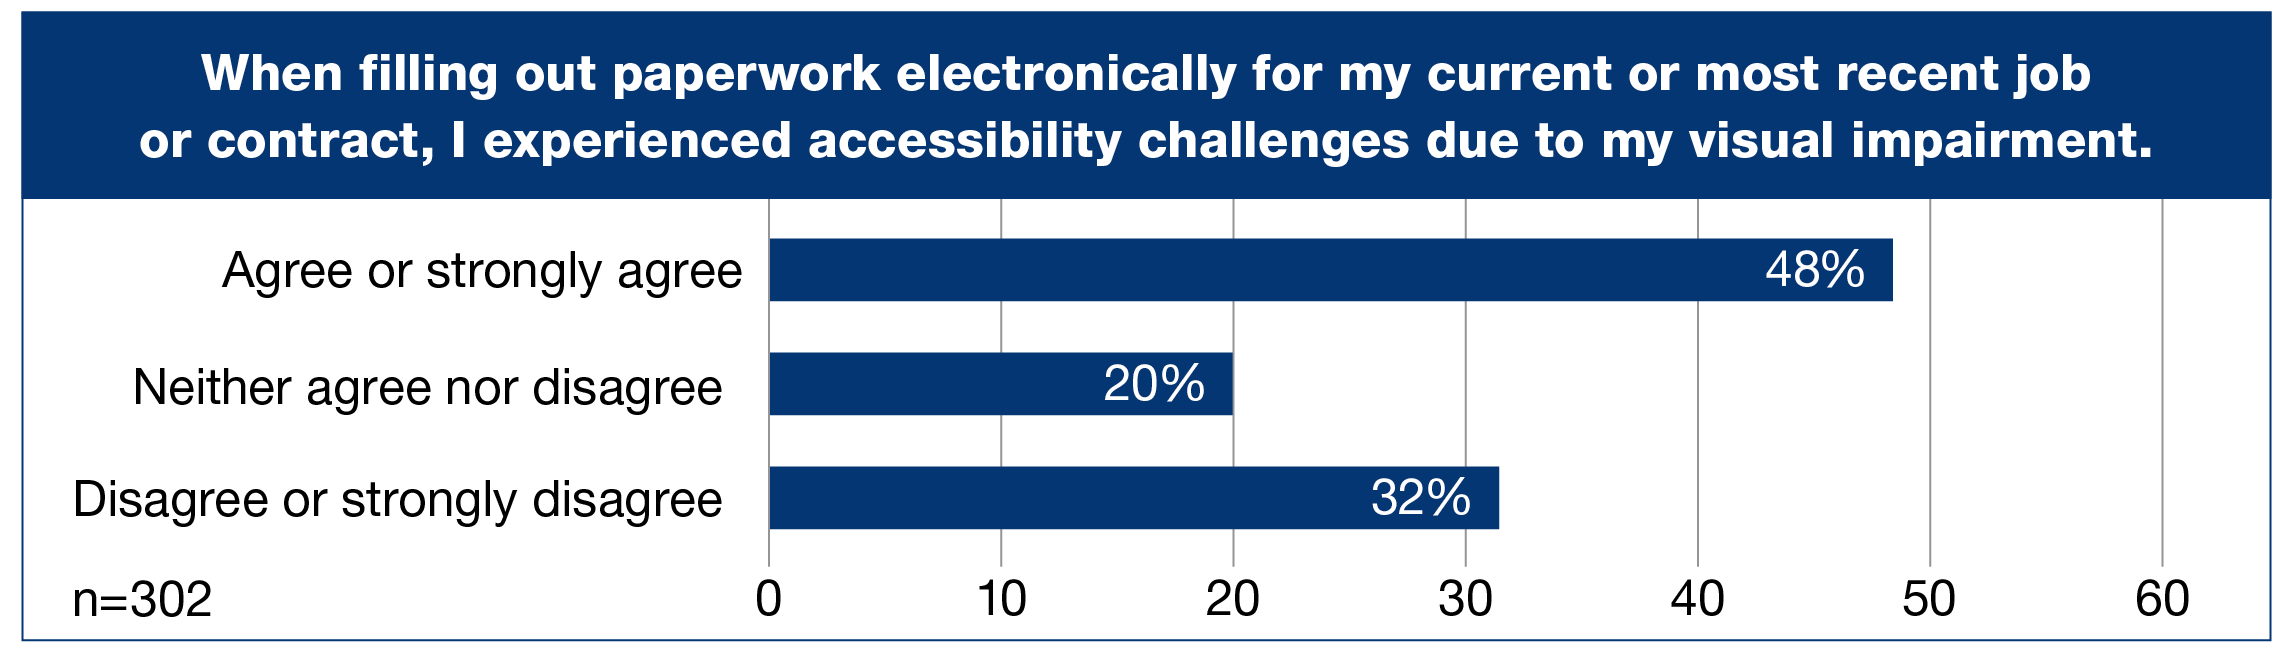 When filling out paperwork electronically for my current or most recent job or contract, I experienced accessibility challenges due to my visual impairment, (Percent of n=302), horizontal bar graph with three bars, Agree or strongly agree, 48%; Neither agree nor disagree, 20%; Disagree or strongly disagree, 32%.